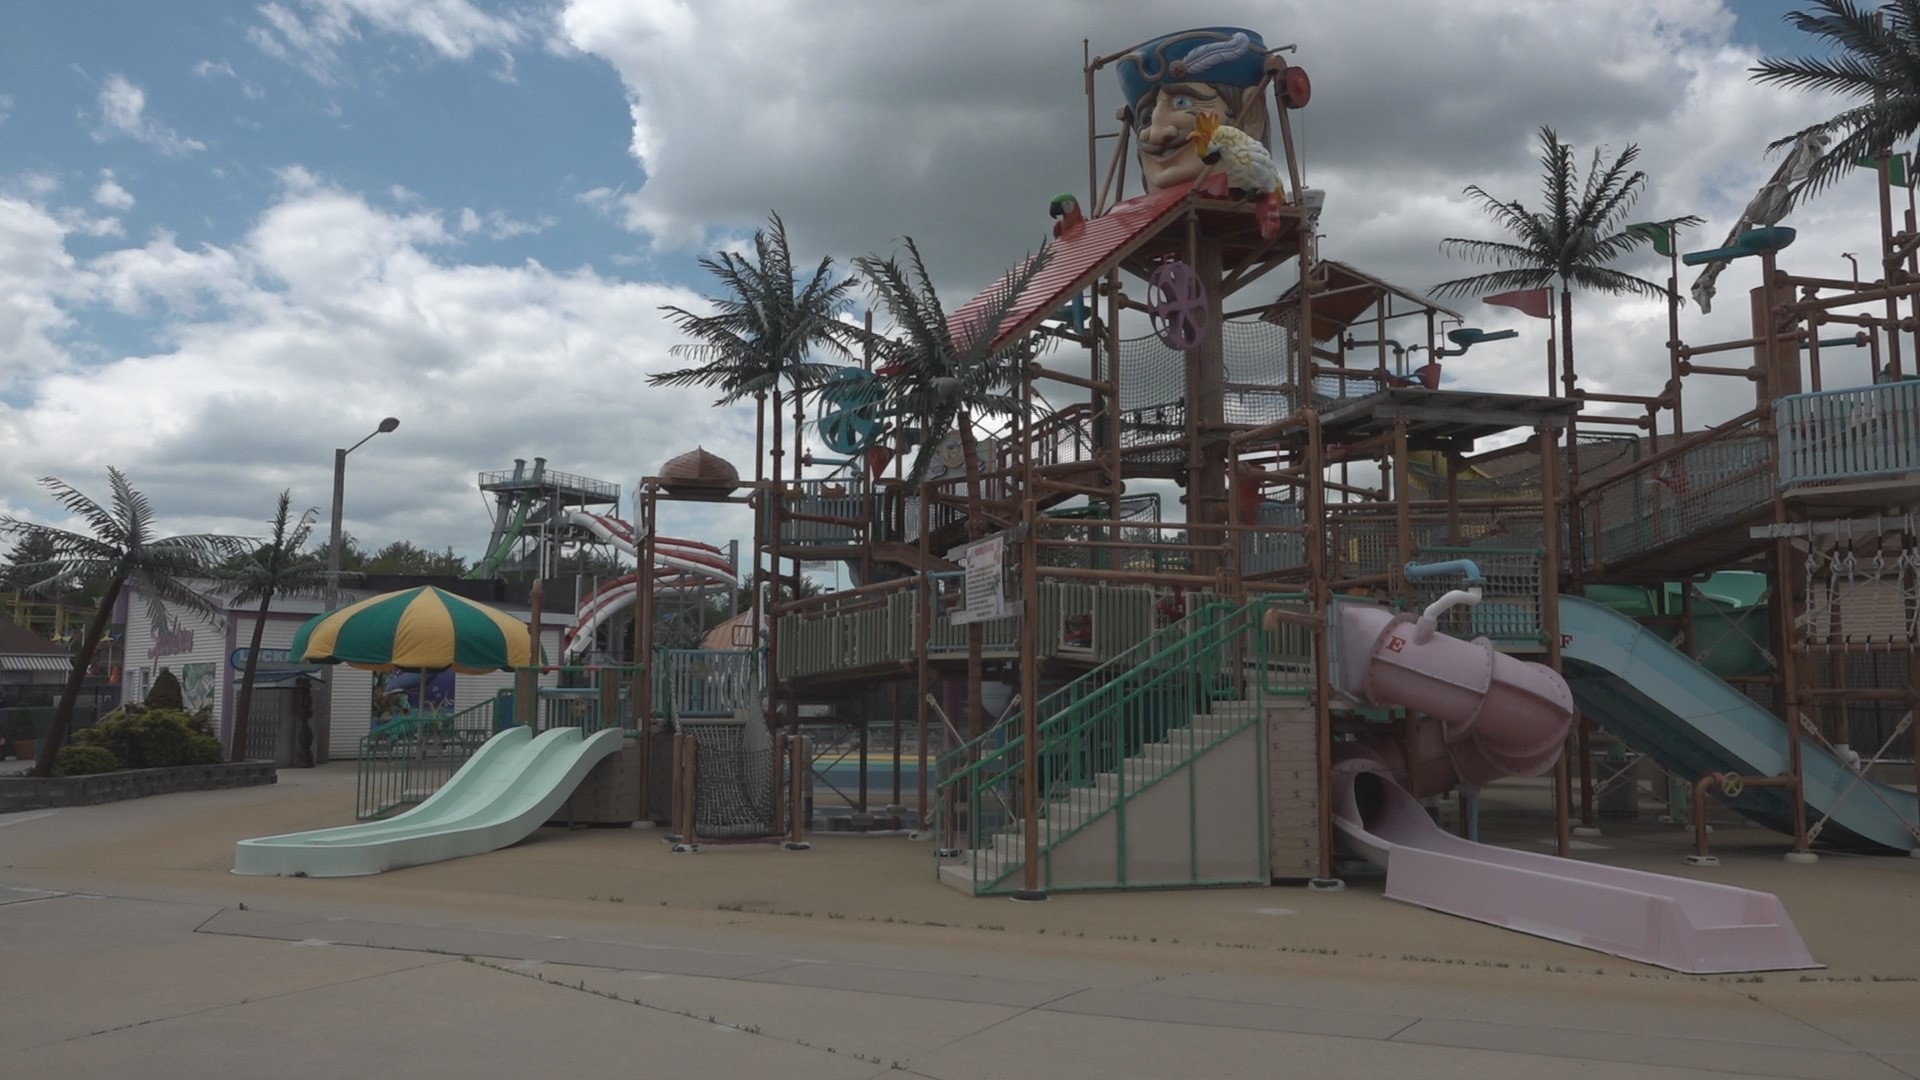 Family-owned Funtown Splashtown USA has been running for almost six decades. 2020 was the first year the park wasn't open seven days a week during the summer.